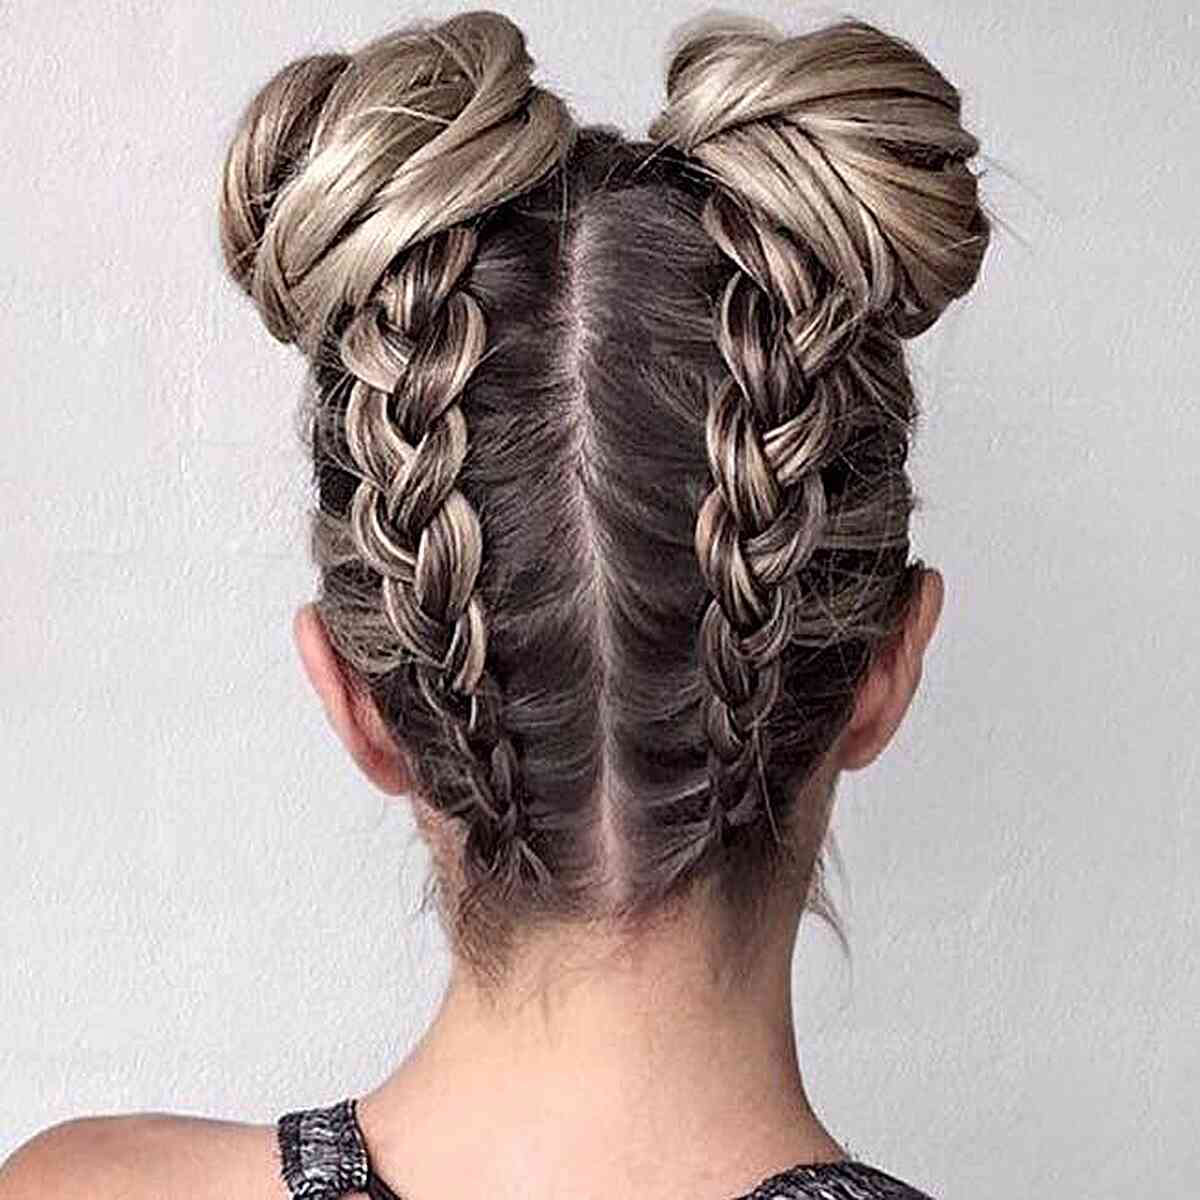 Upside Down Braids with Space Buns for Festivals